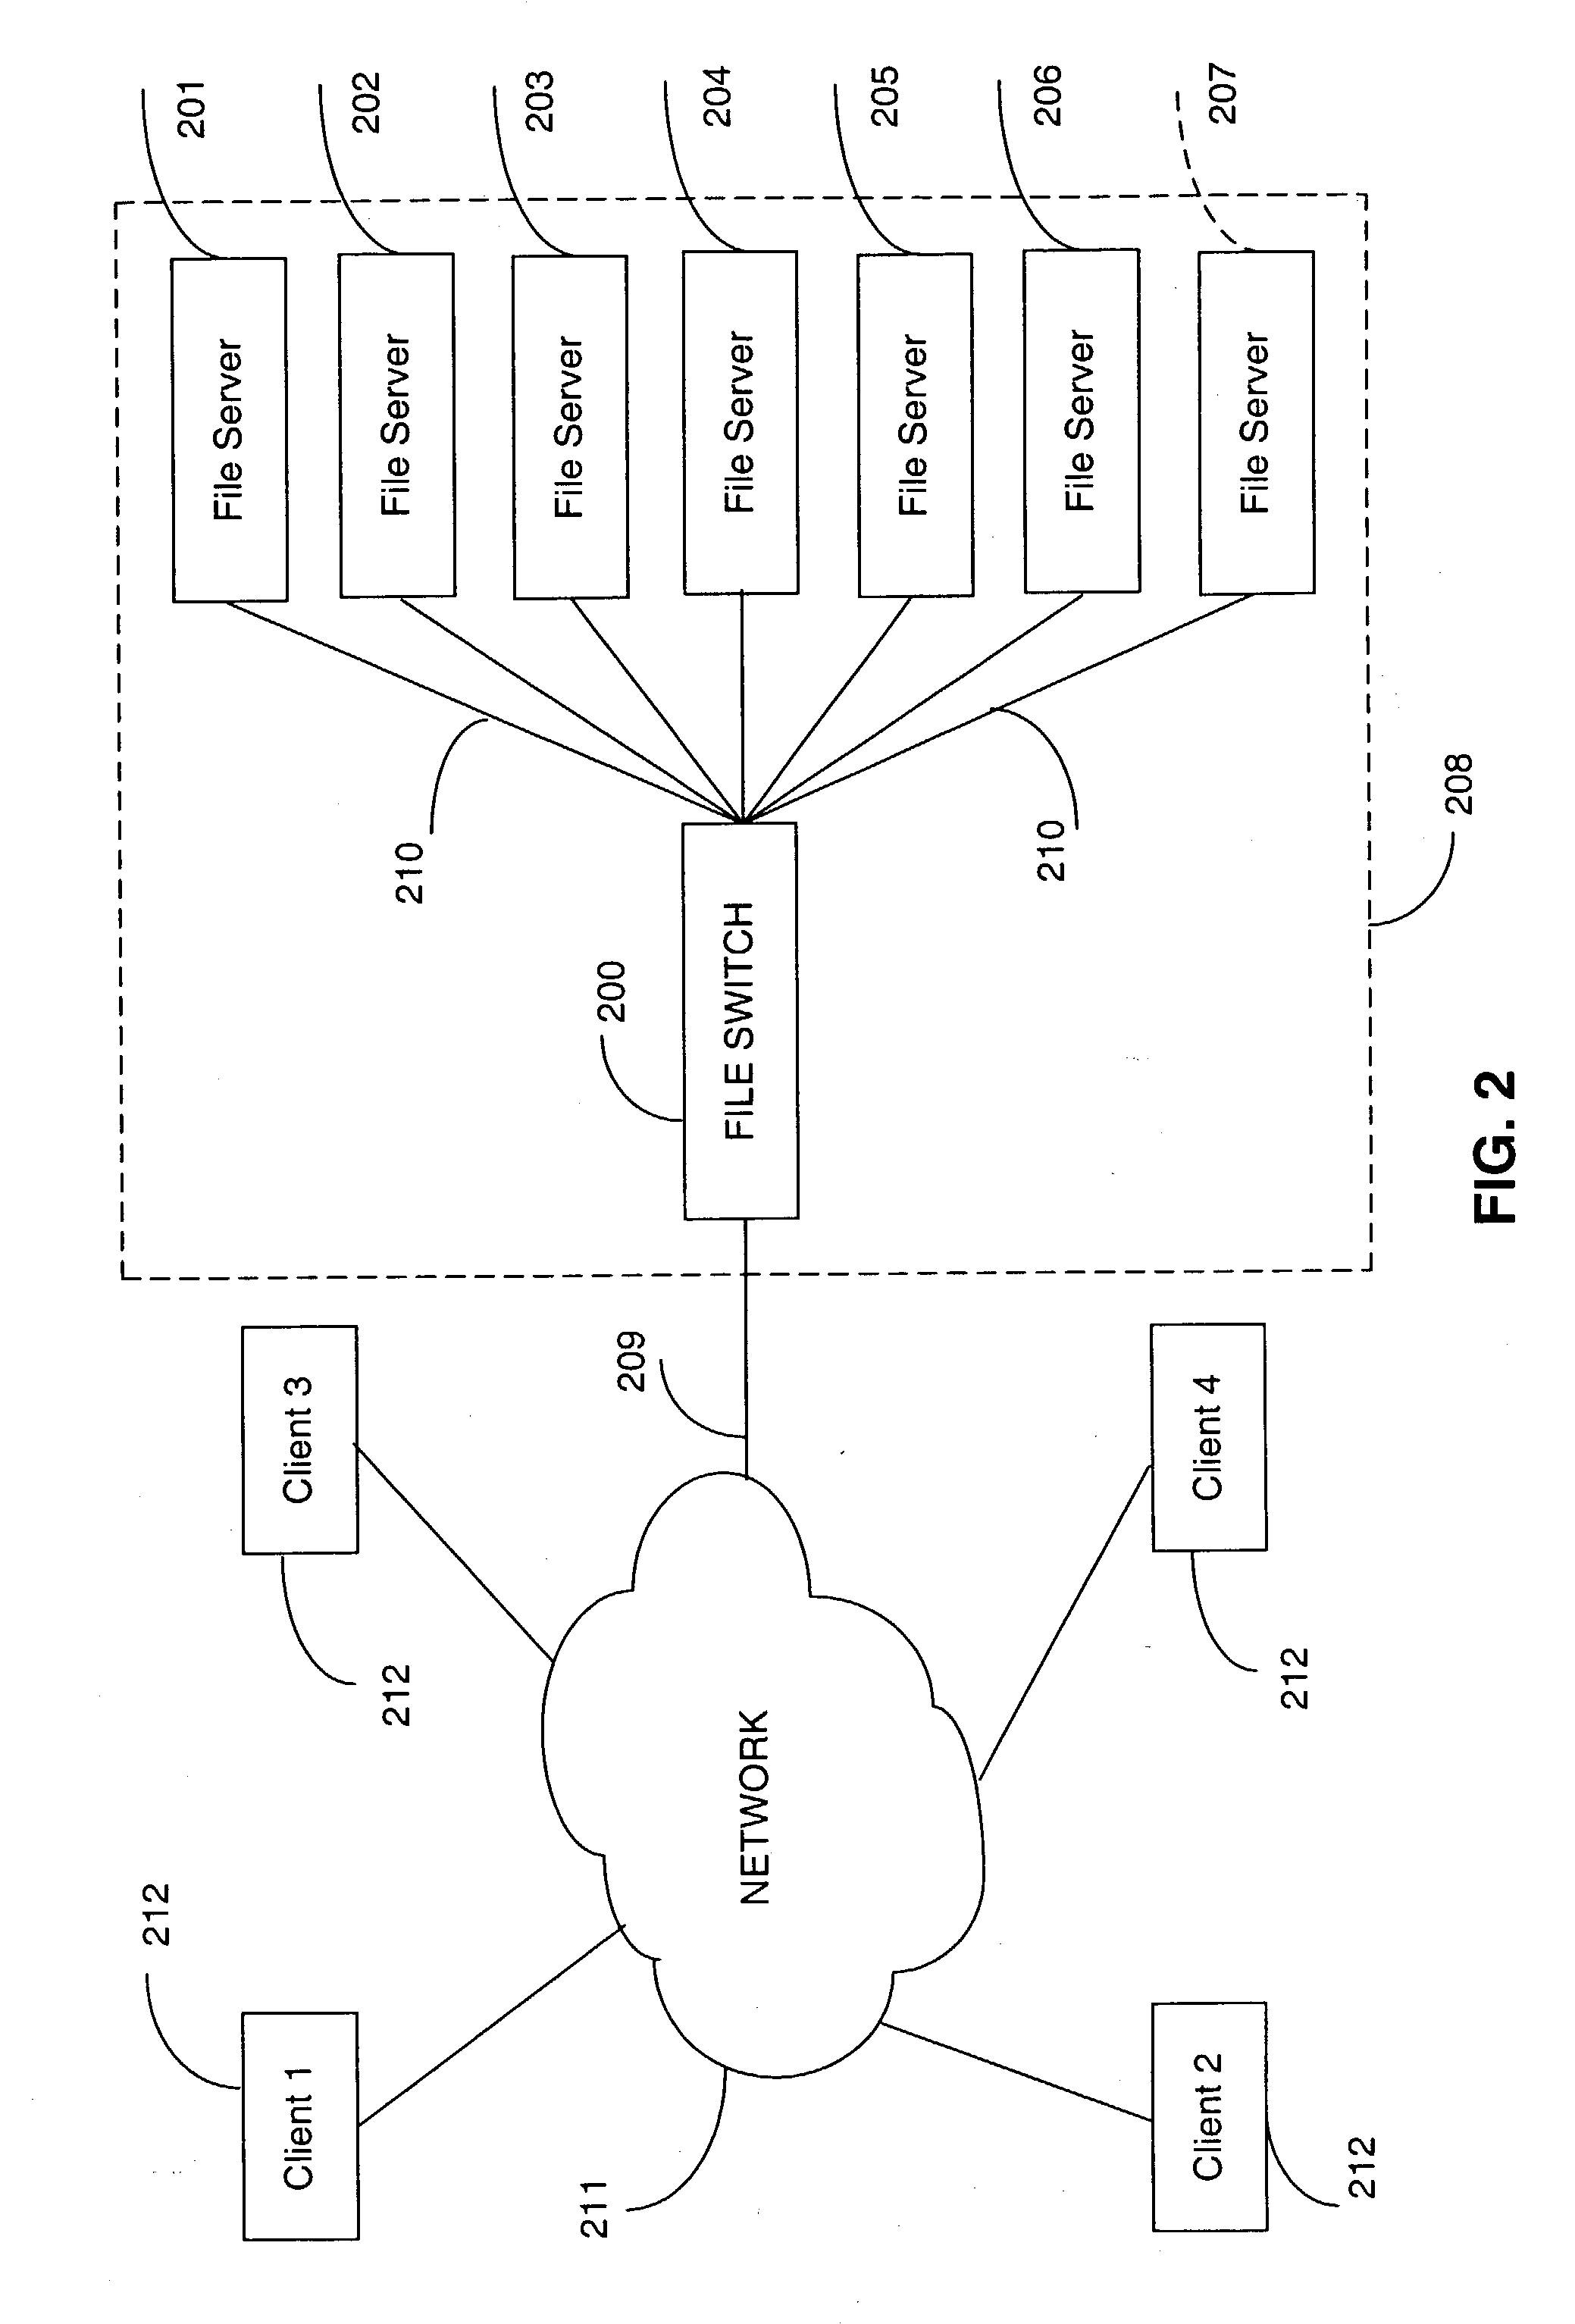 Aggregated opportunistic lock and aggregated implicit lock management for locking aggregated files in a switched file system